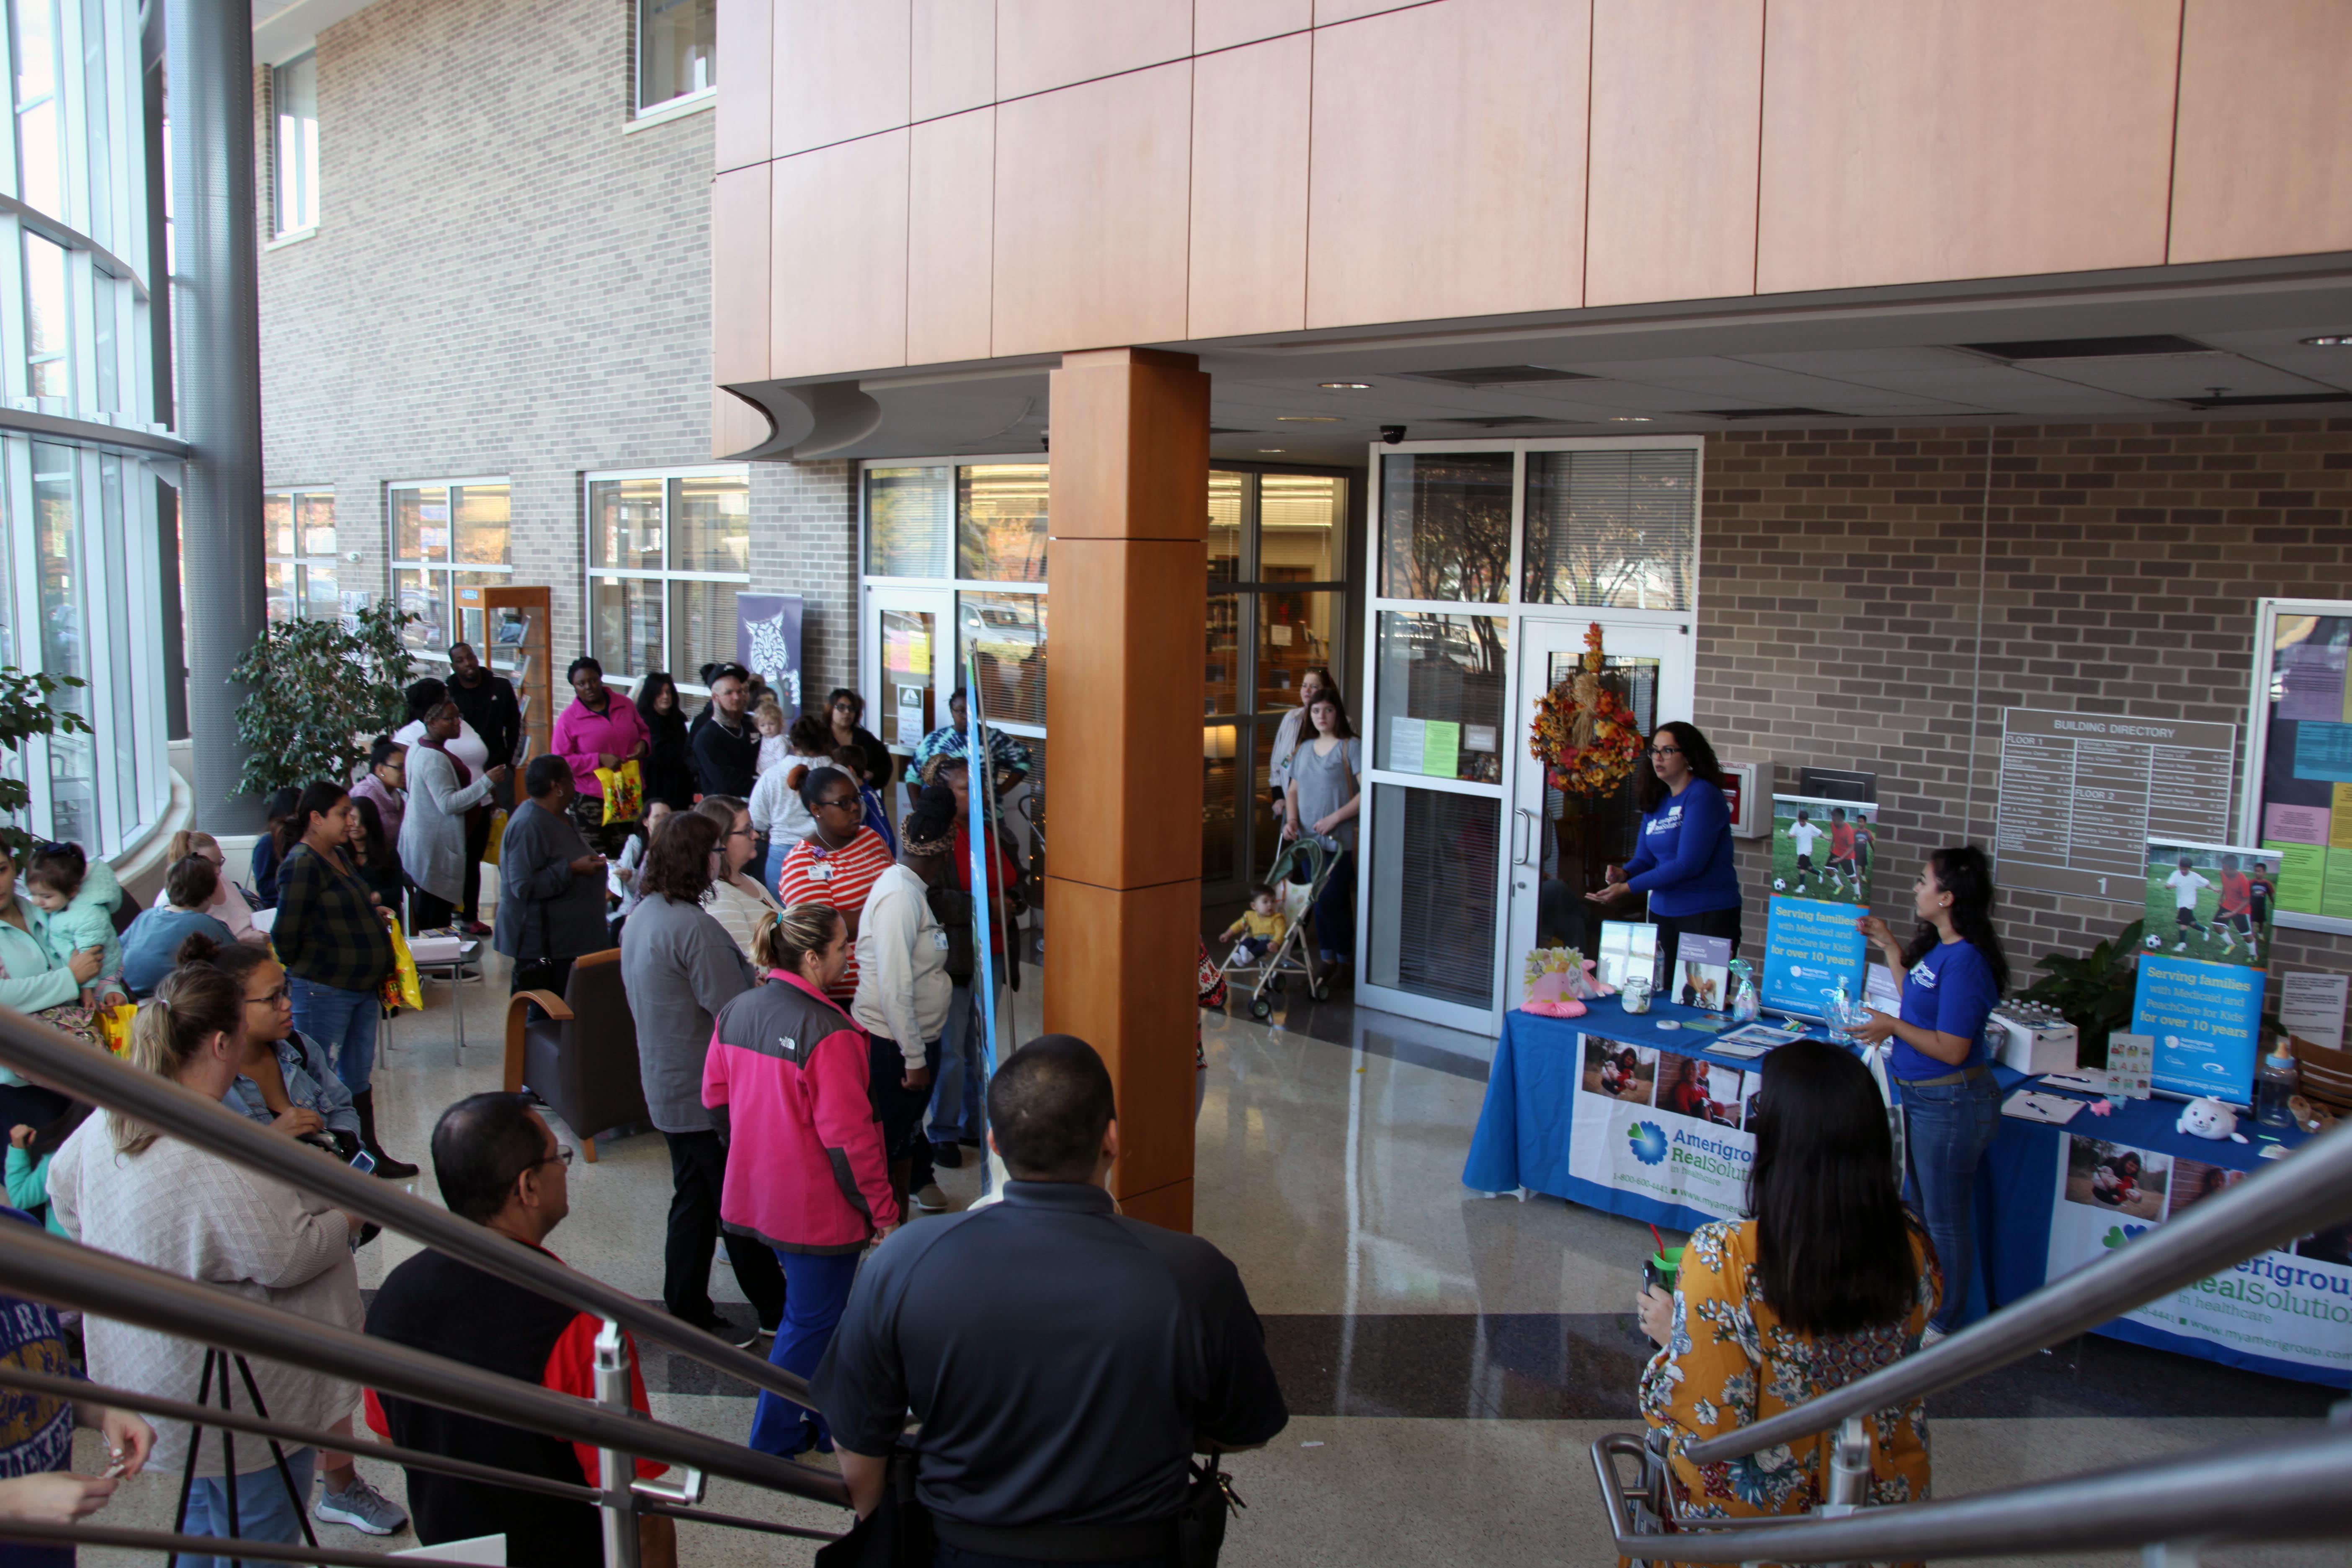 Parents both inside and outside the GNTC community filled the H Building on the morning of Thursday, Nov. 21 for free diapers provided by Amerigroup.